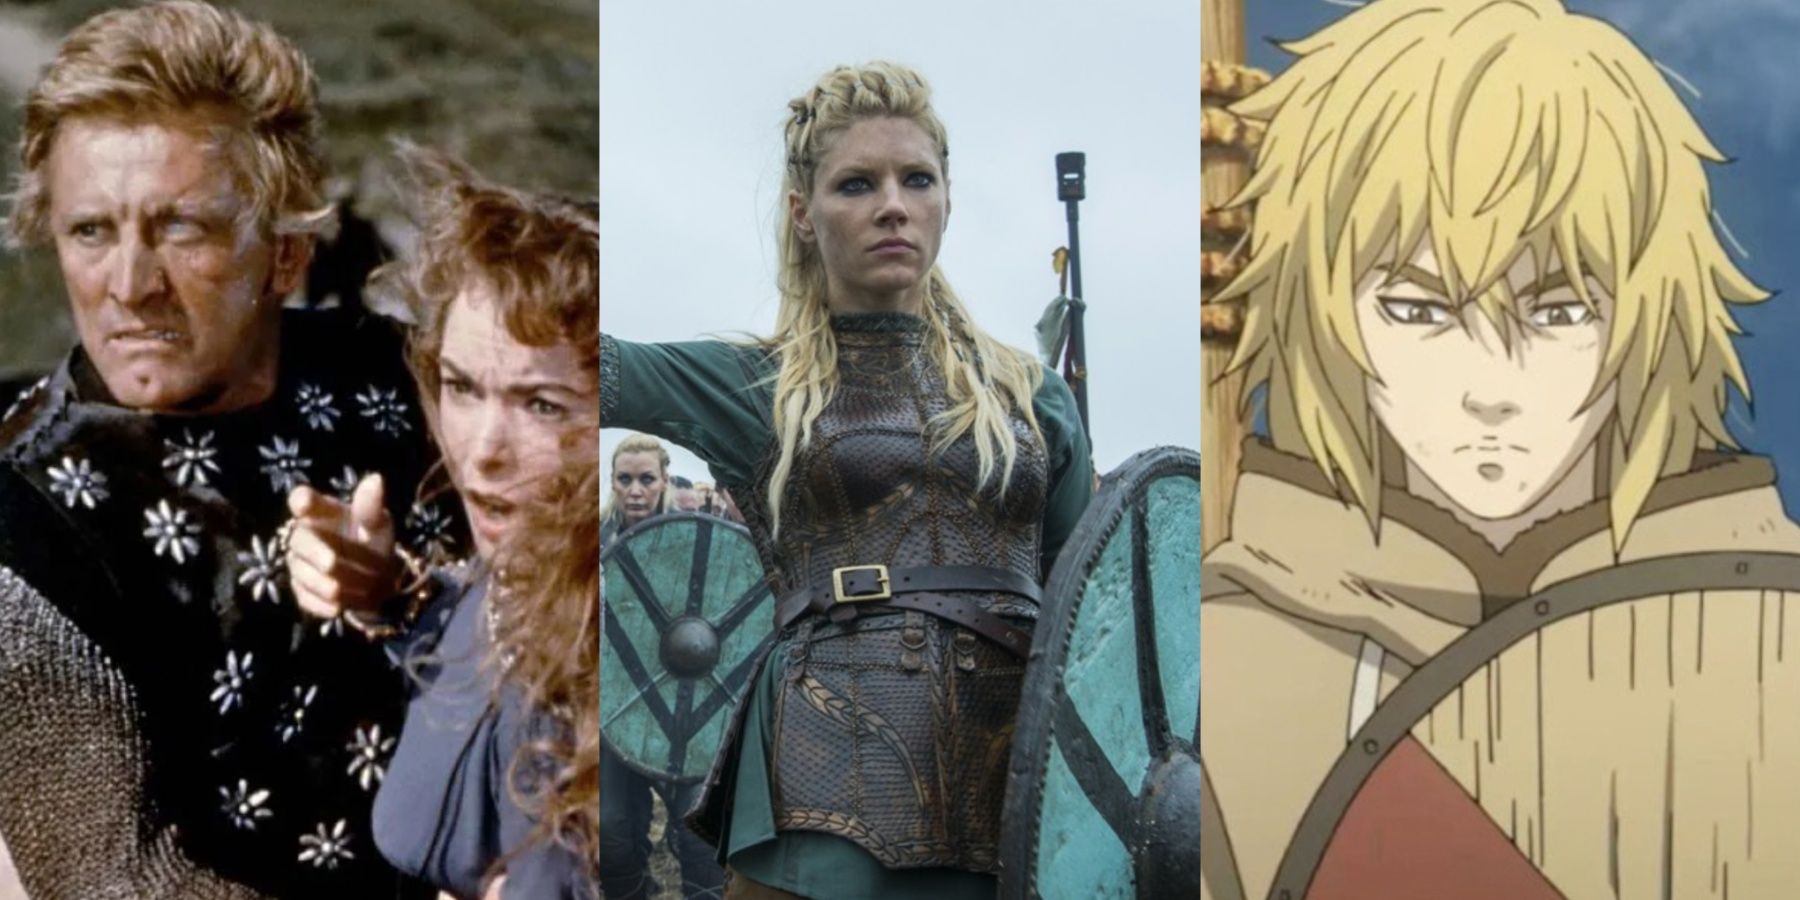 A side by side image features characters from The Vikings 1958 movie, Vikings TV drama, and Vinland Saga anime